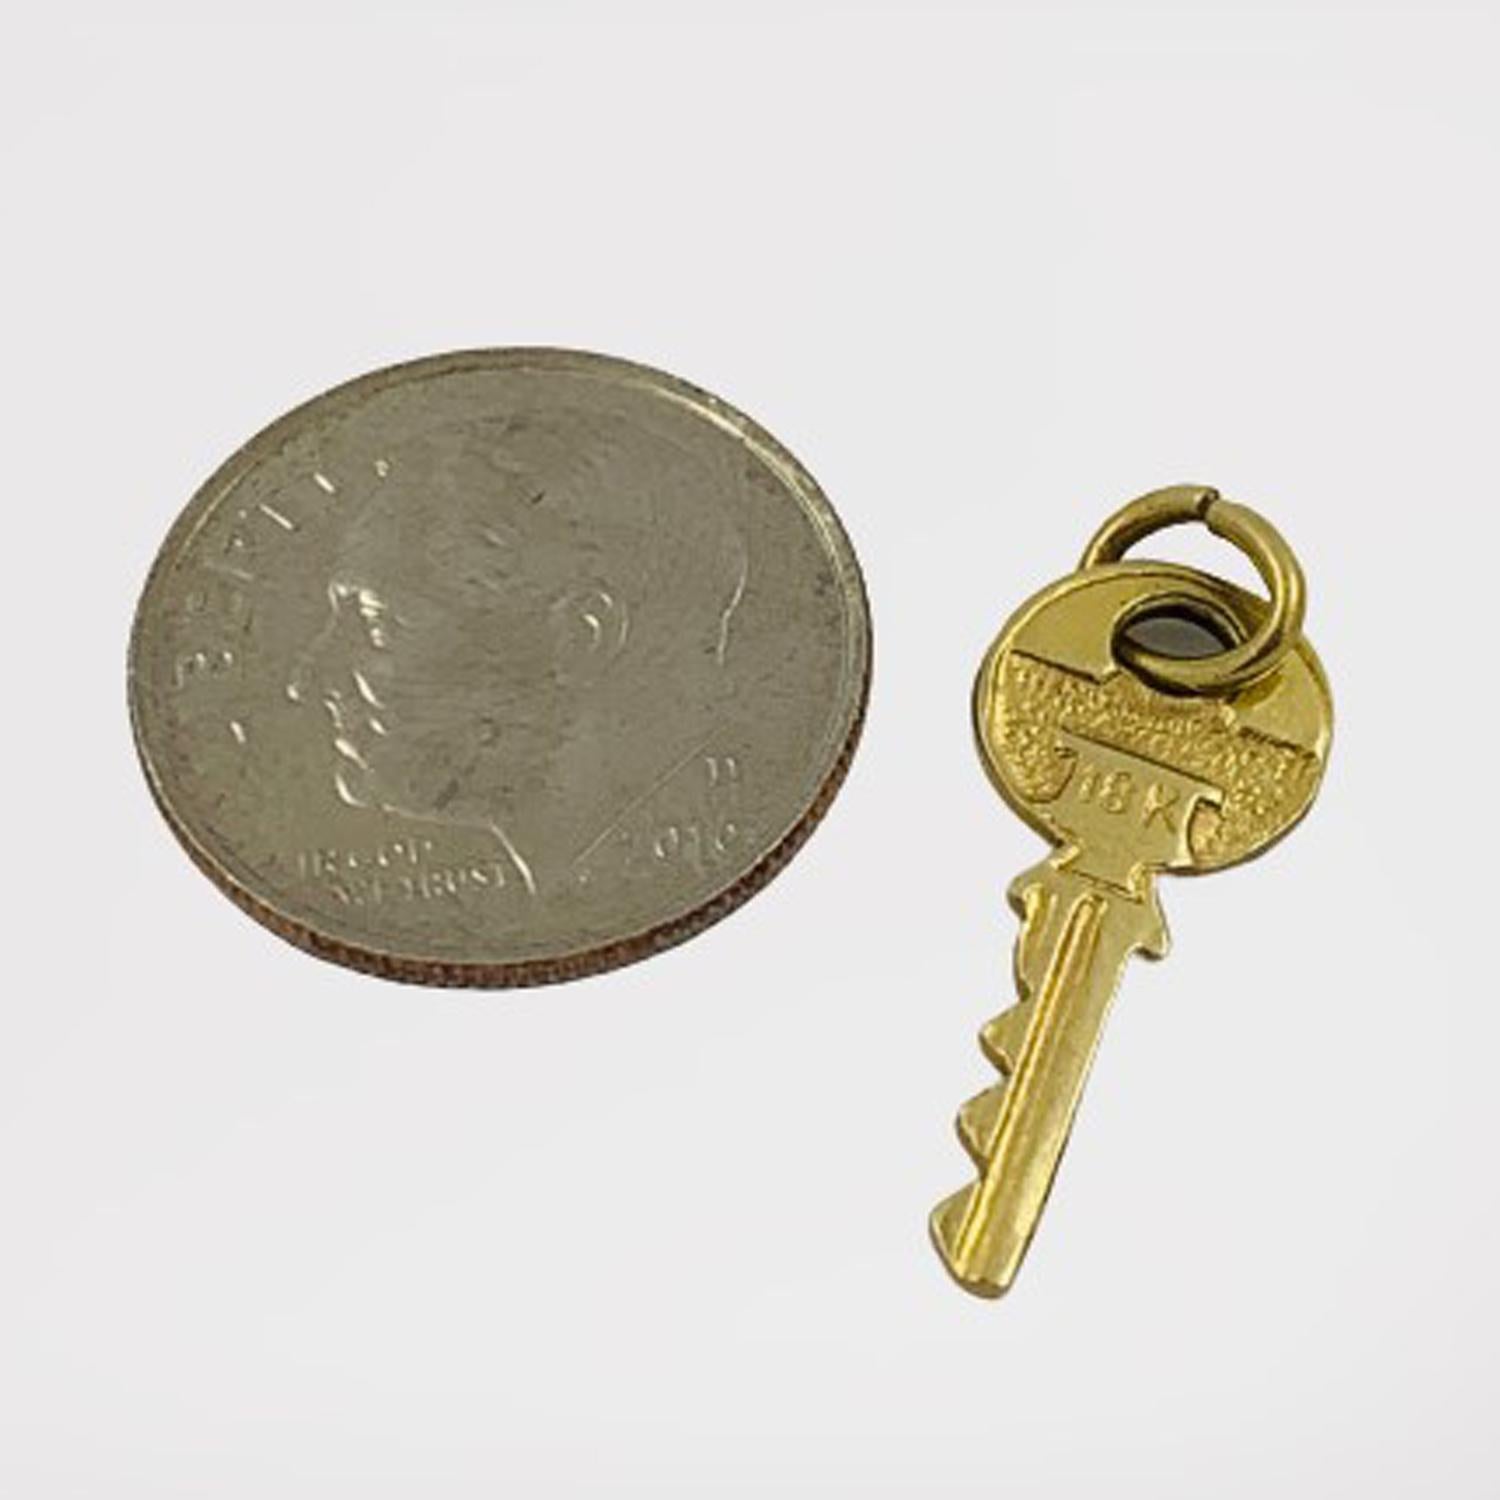 Vintage Key Shaped Charm Pendant Circa 1950's

Crafted of solid 18K yellow gold, this little charm will be the key to your heart. It's a perfect memory marker for first time home buyers, or your time living in a special home. Engraved with the